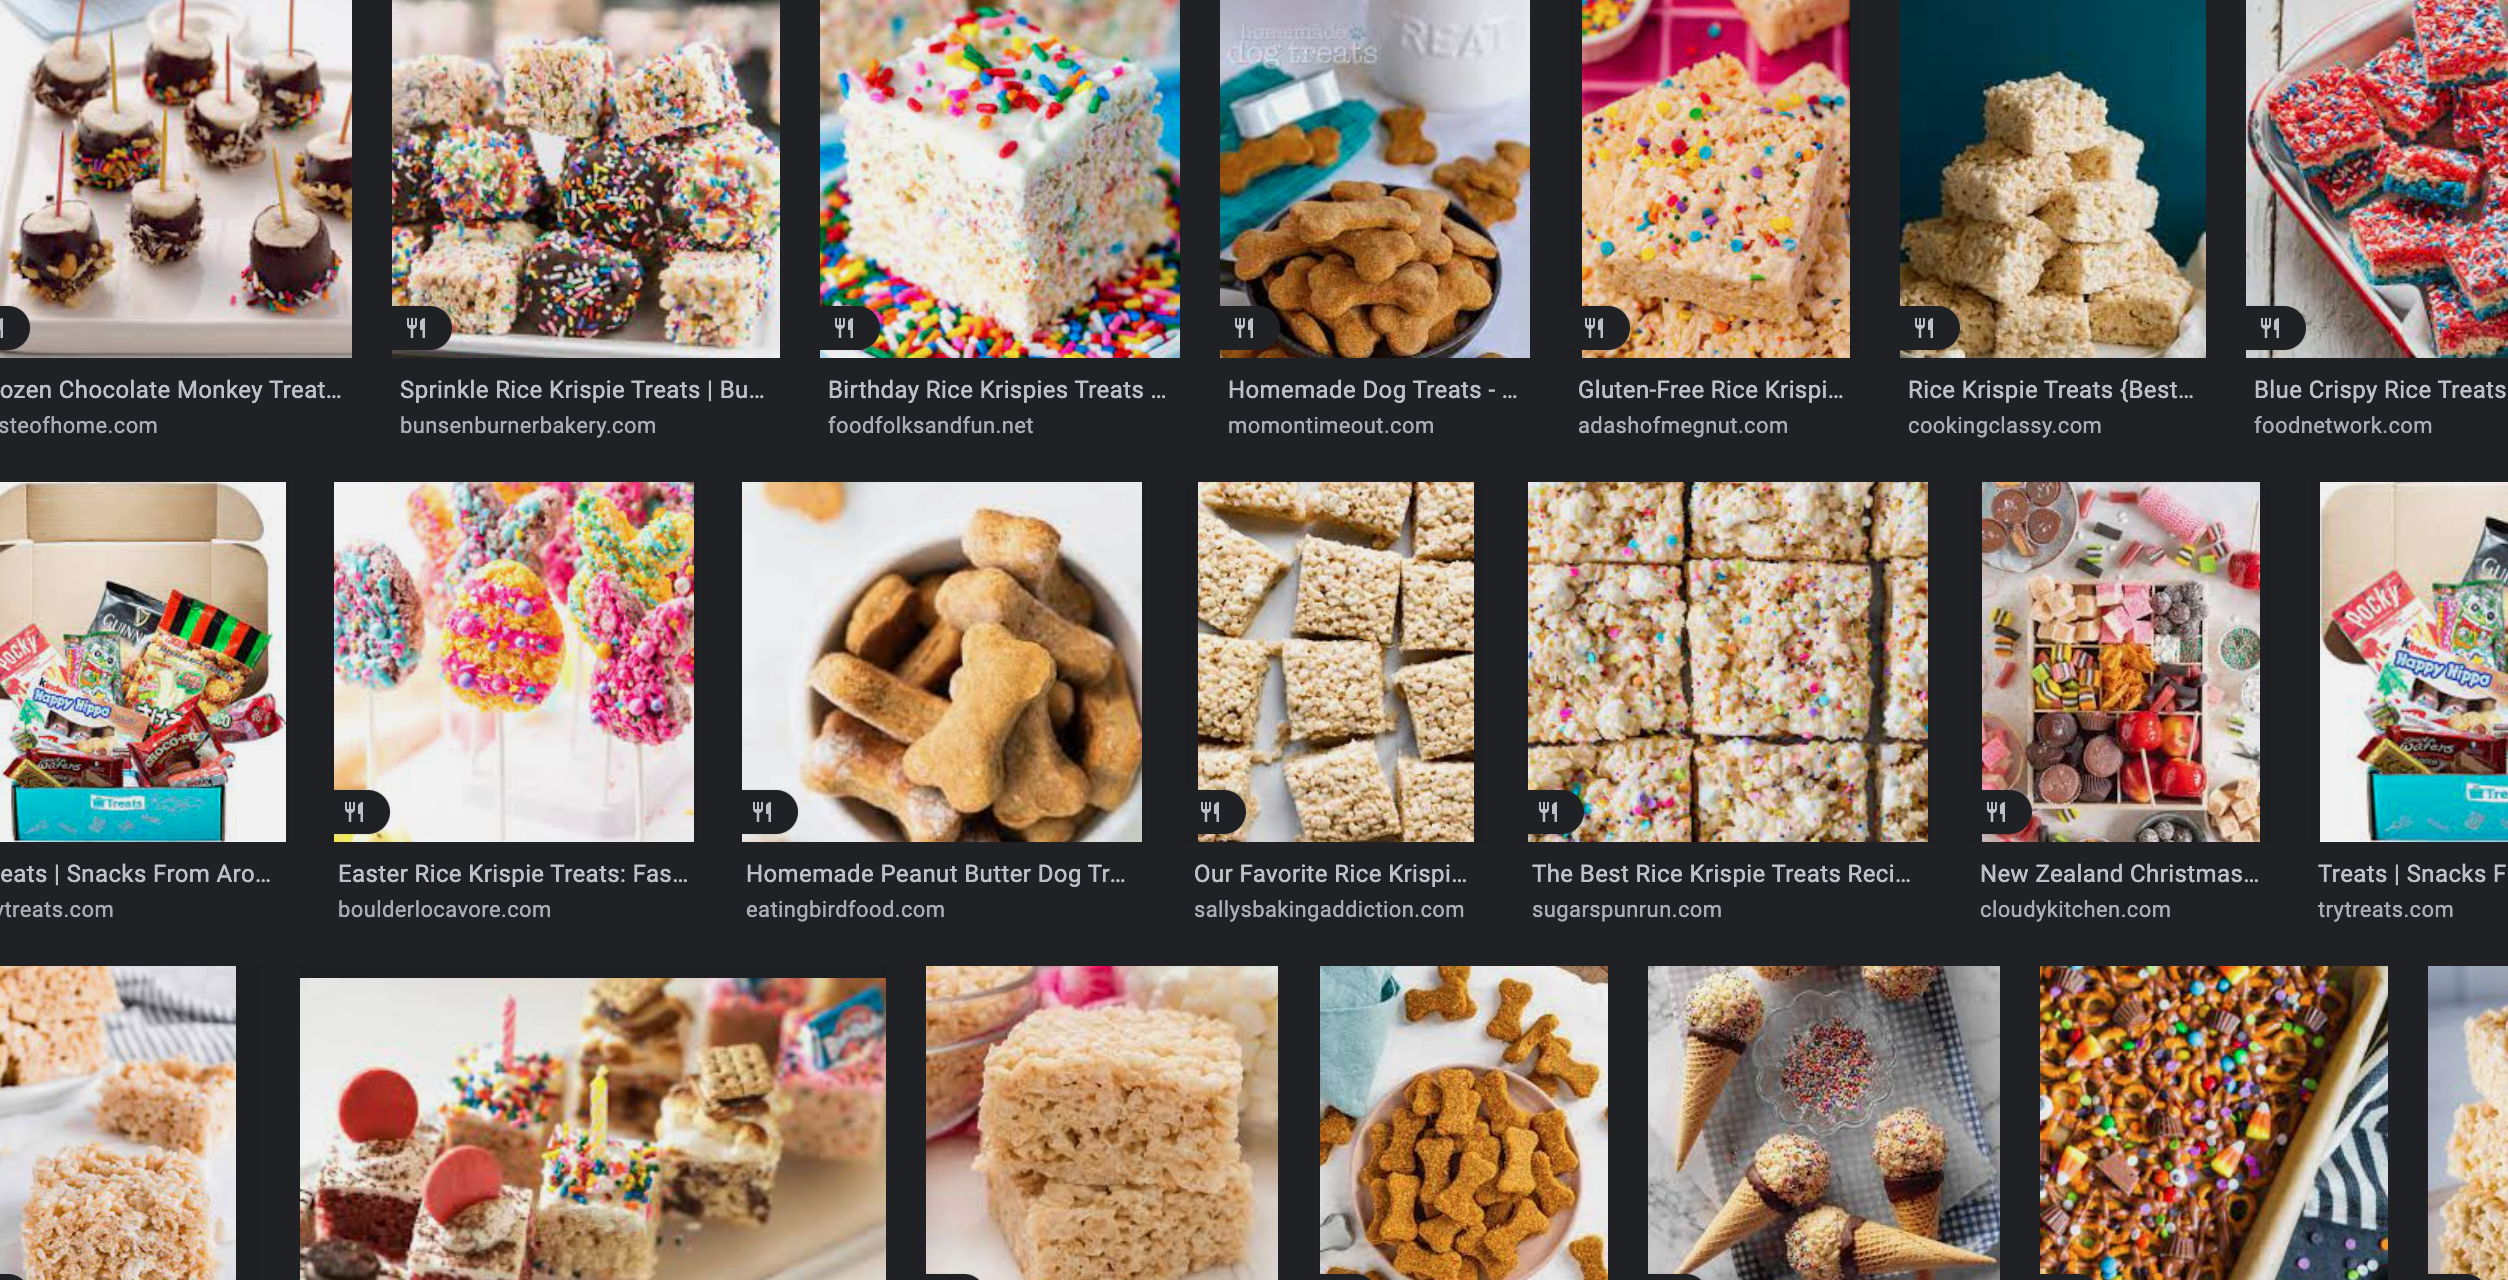 Google image search for "treat"